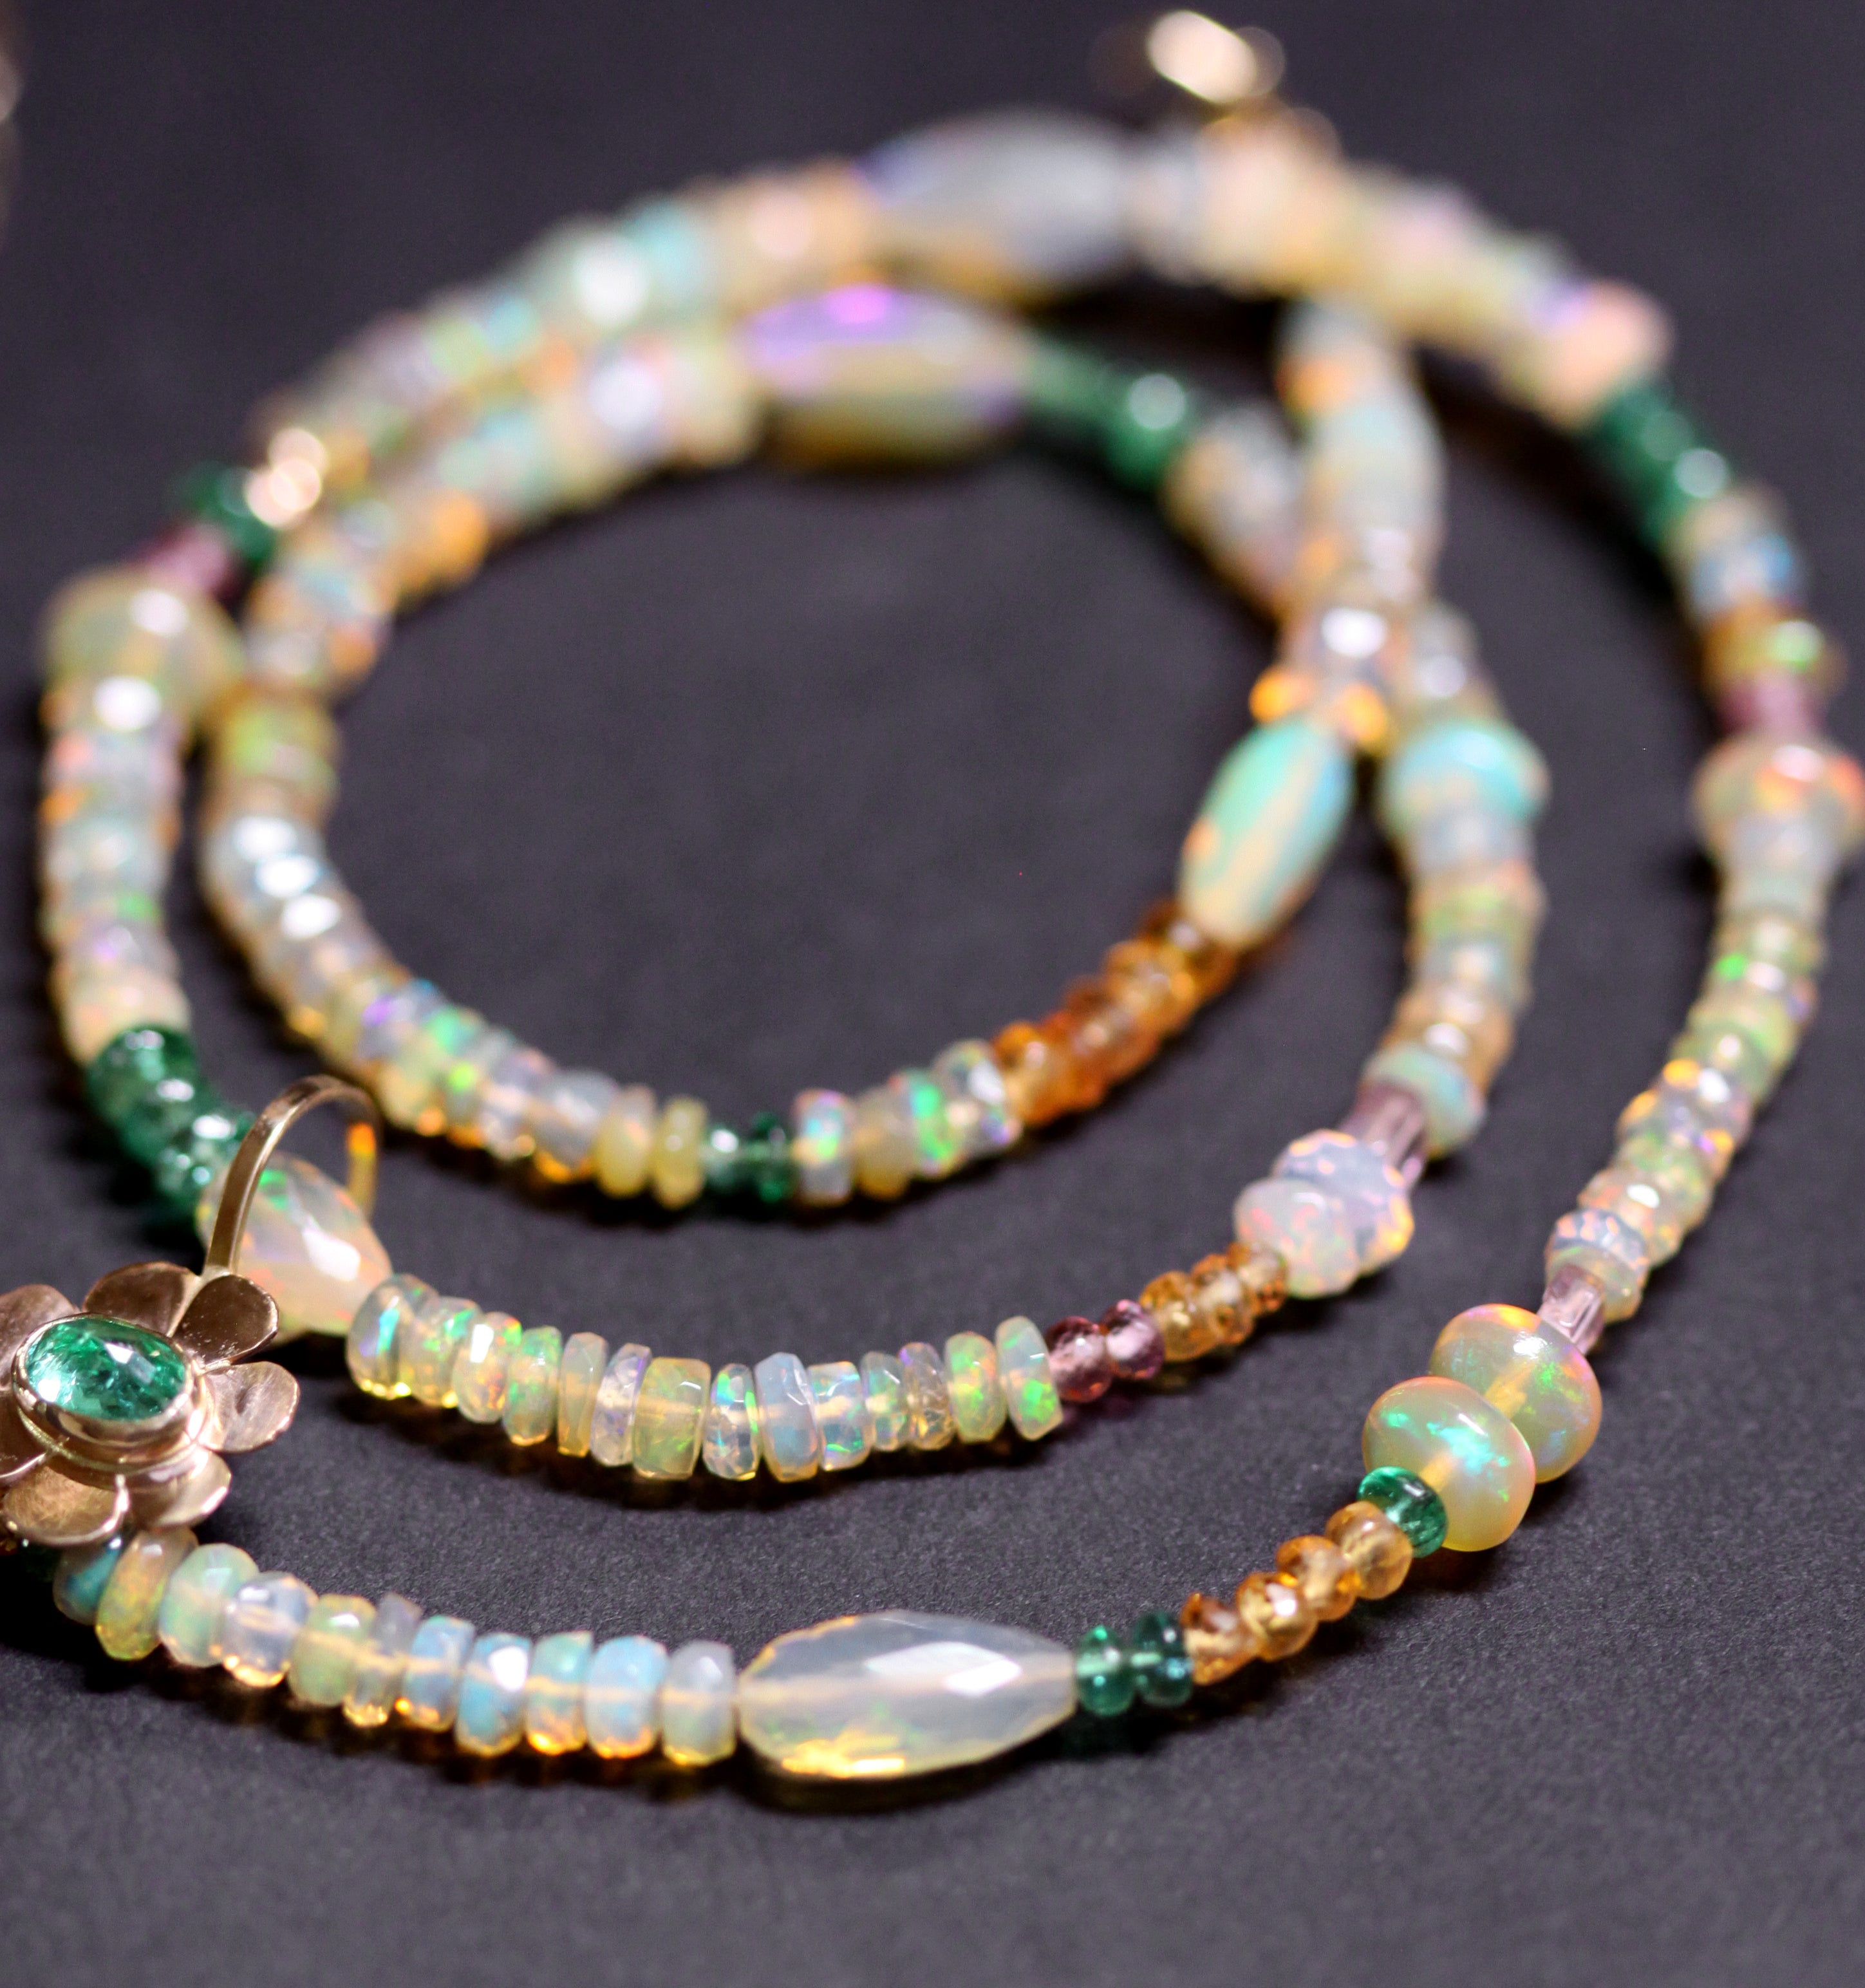 14K Opal and Emerald Sunshine and Rainbows Necklace, One of a Kind